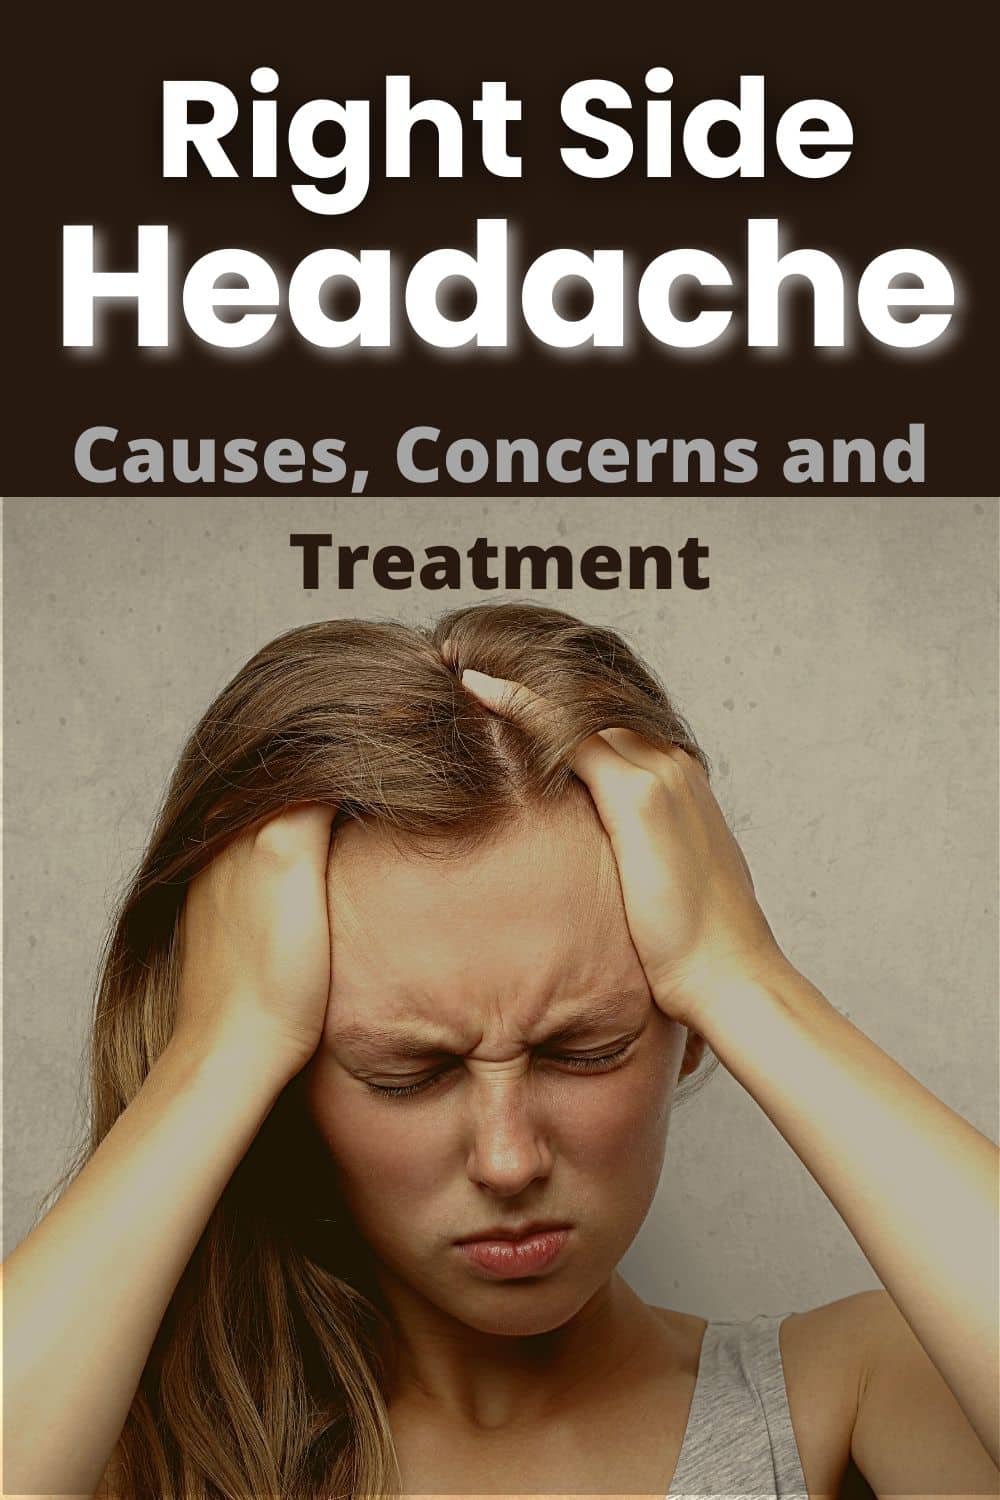 headache-on-right-side-of-head-and-eye-causes-concerns-meaning-and